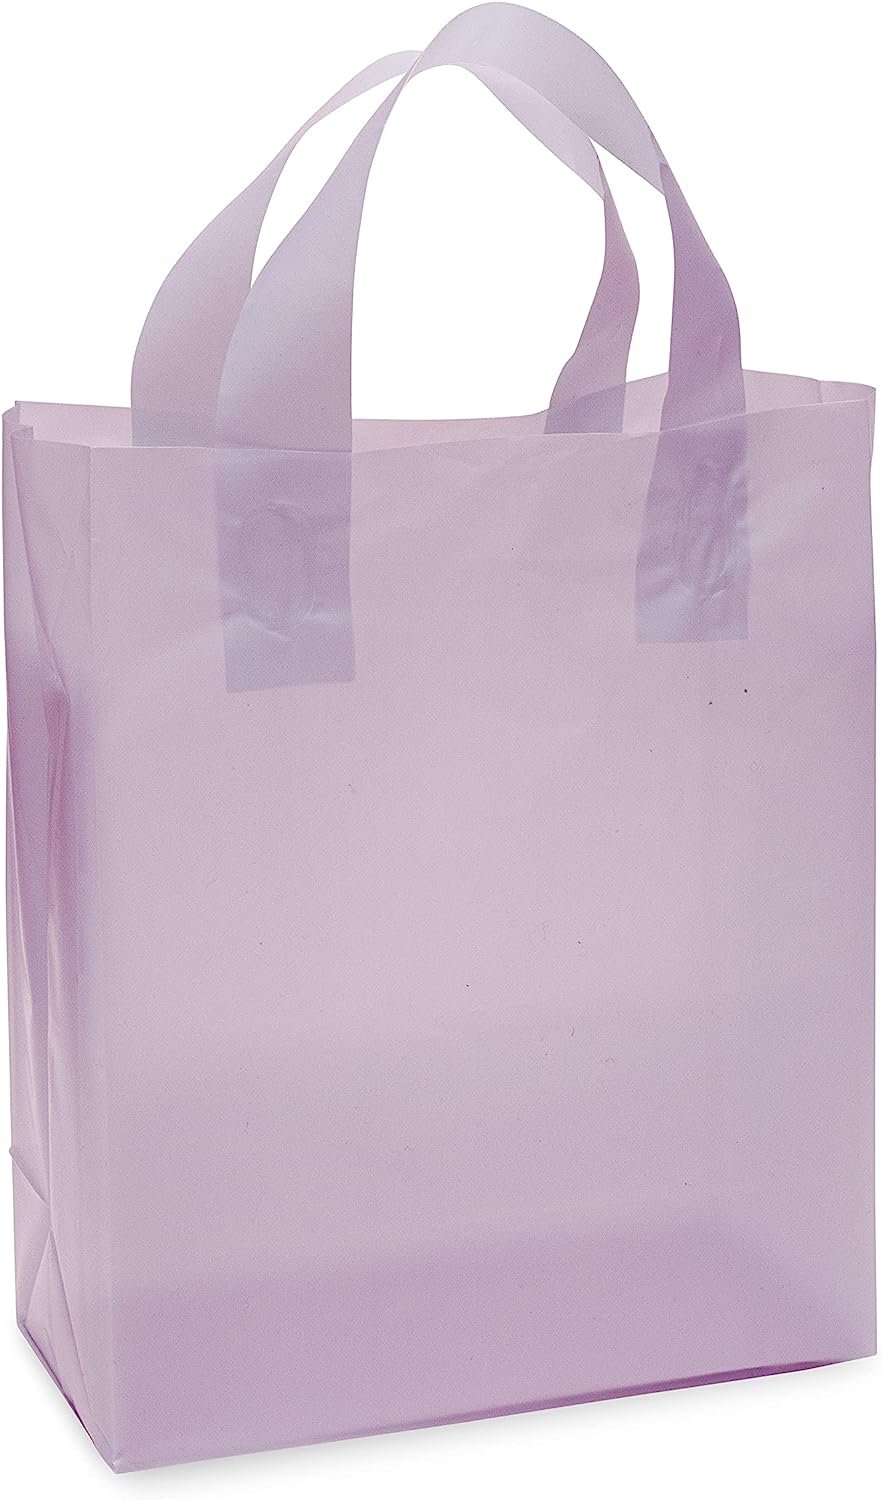 Boutique Bags - 8x4x10 Inch 100 Pack Small Clear Frosted Purple Plastic Shopping Bags with Handles for Small Business, Retail, Merchandise, Delivery & Take Out, Goodie & Party Favor Bags, in Bulk